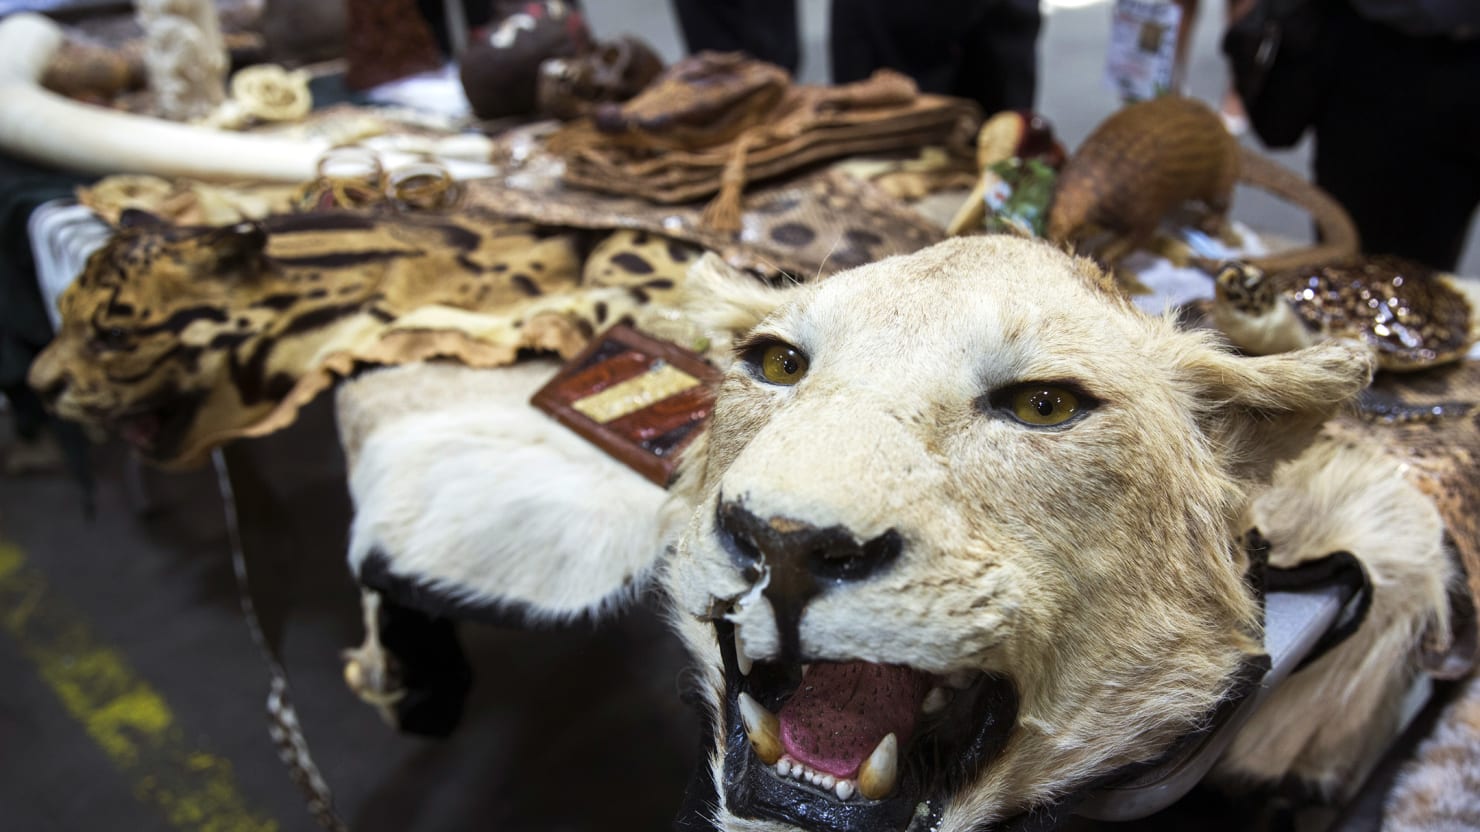 The illegal Wildlife trade: inside the World of Poachers, Smugglers and traders. Мясо львов едят